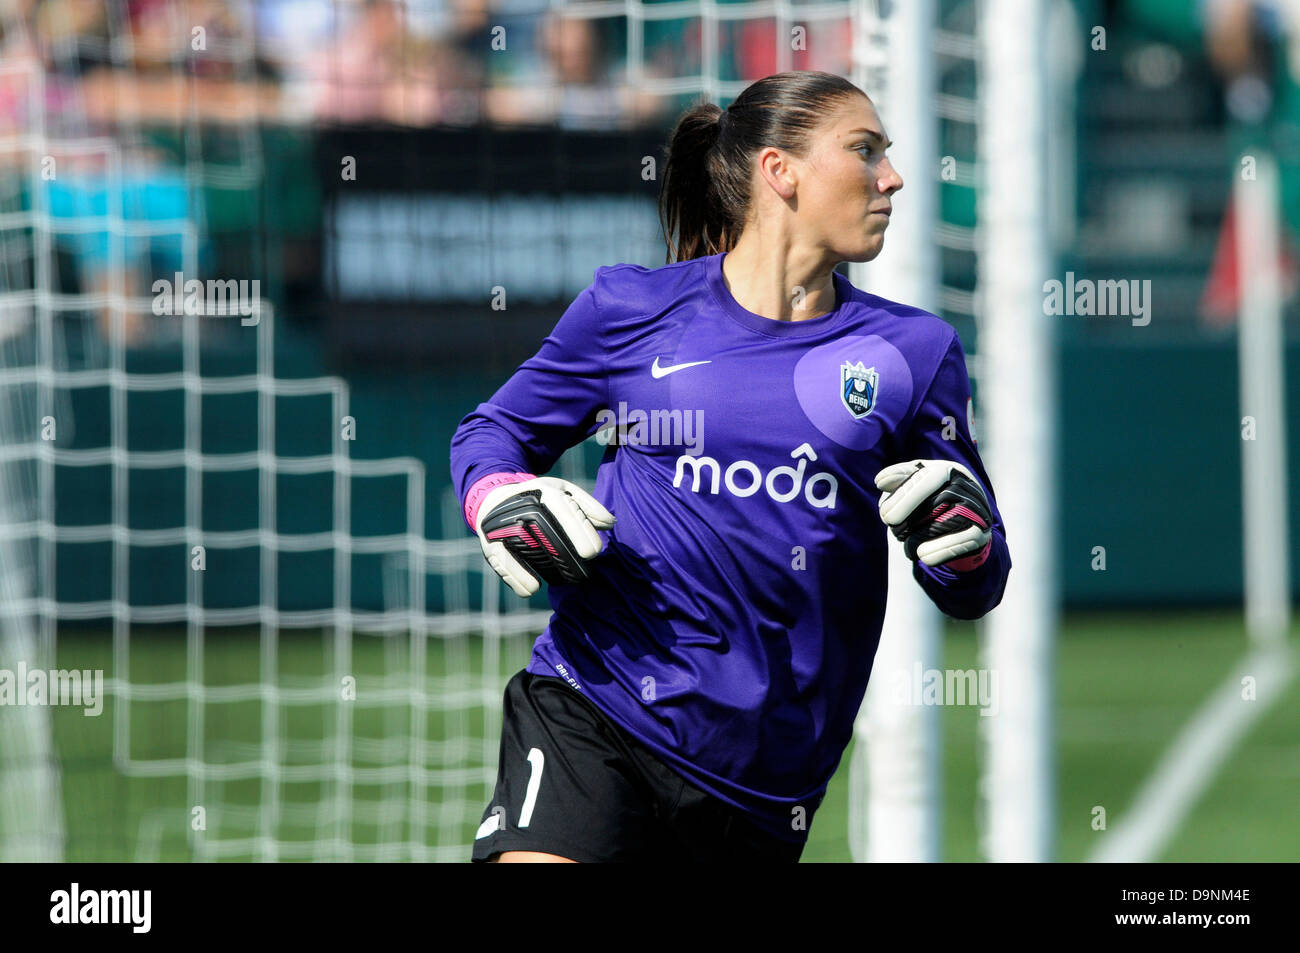 Rochester, NY, USA. 23rd June, 2013. June 23, 2013: Seattle Reign FC goalkeeper Hope Solo #1 during the first half of play as the Seattle Reign FC tied the Western New York Flash 1-1 at Sahlen's Stadium in Rochester, NY. ©csm/Alamy Live News Stock Photo